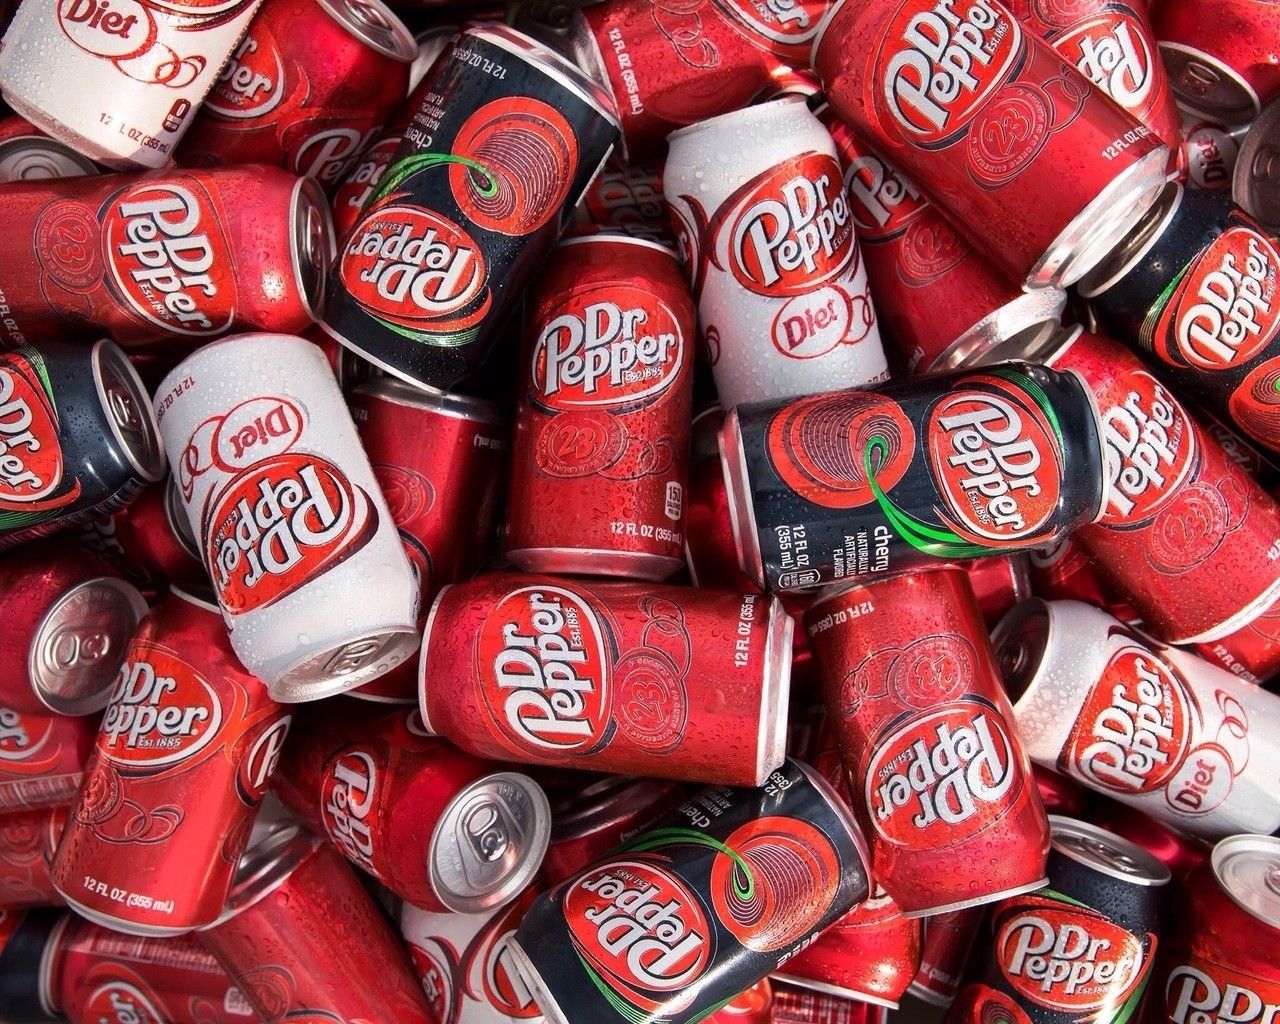 How has Diet Dr Pepper maintained its popularity over the years?